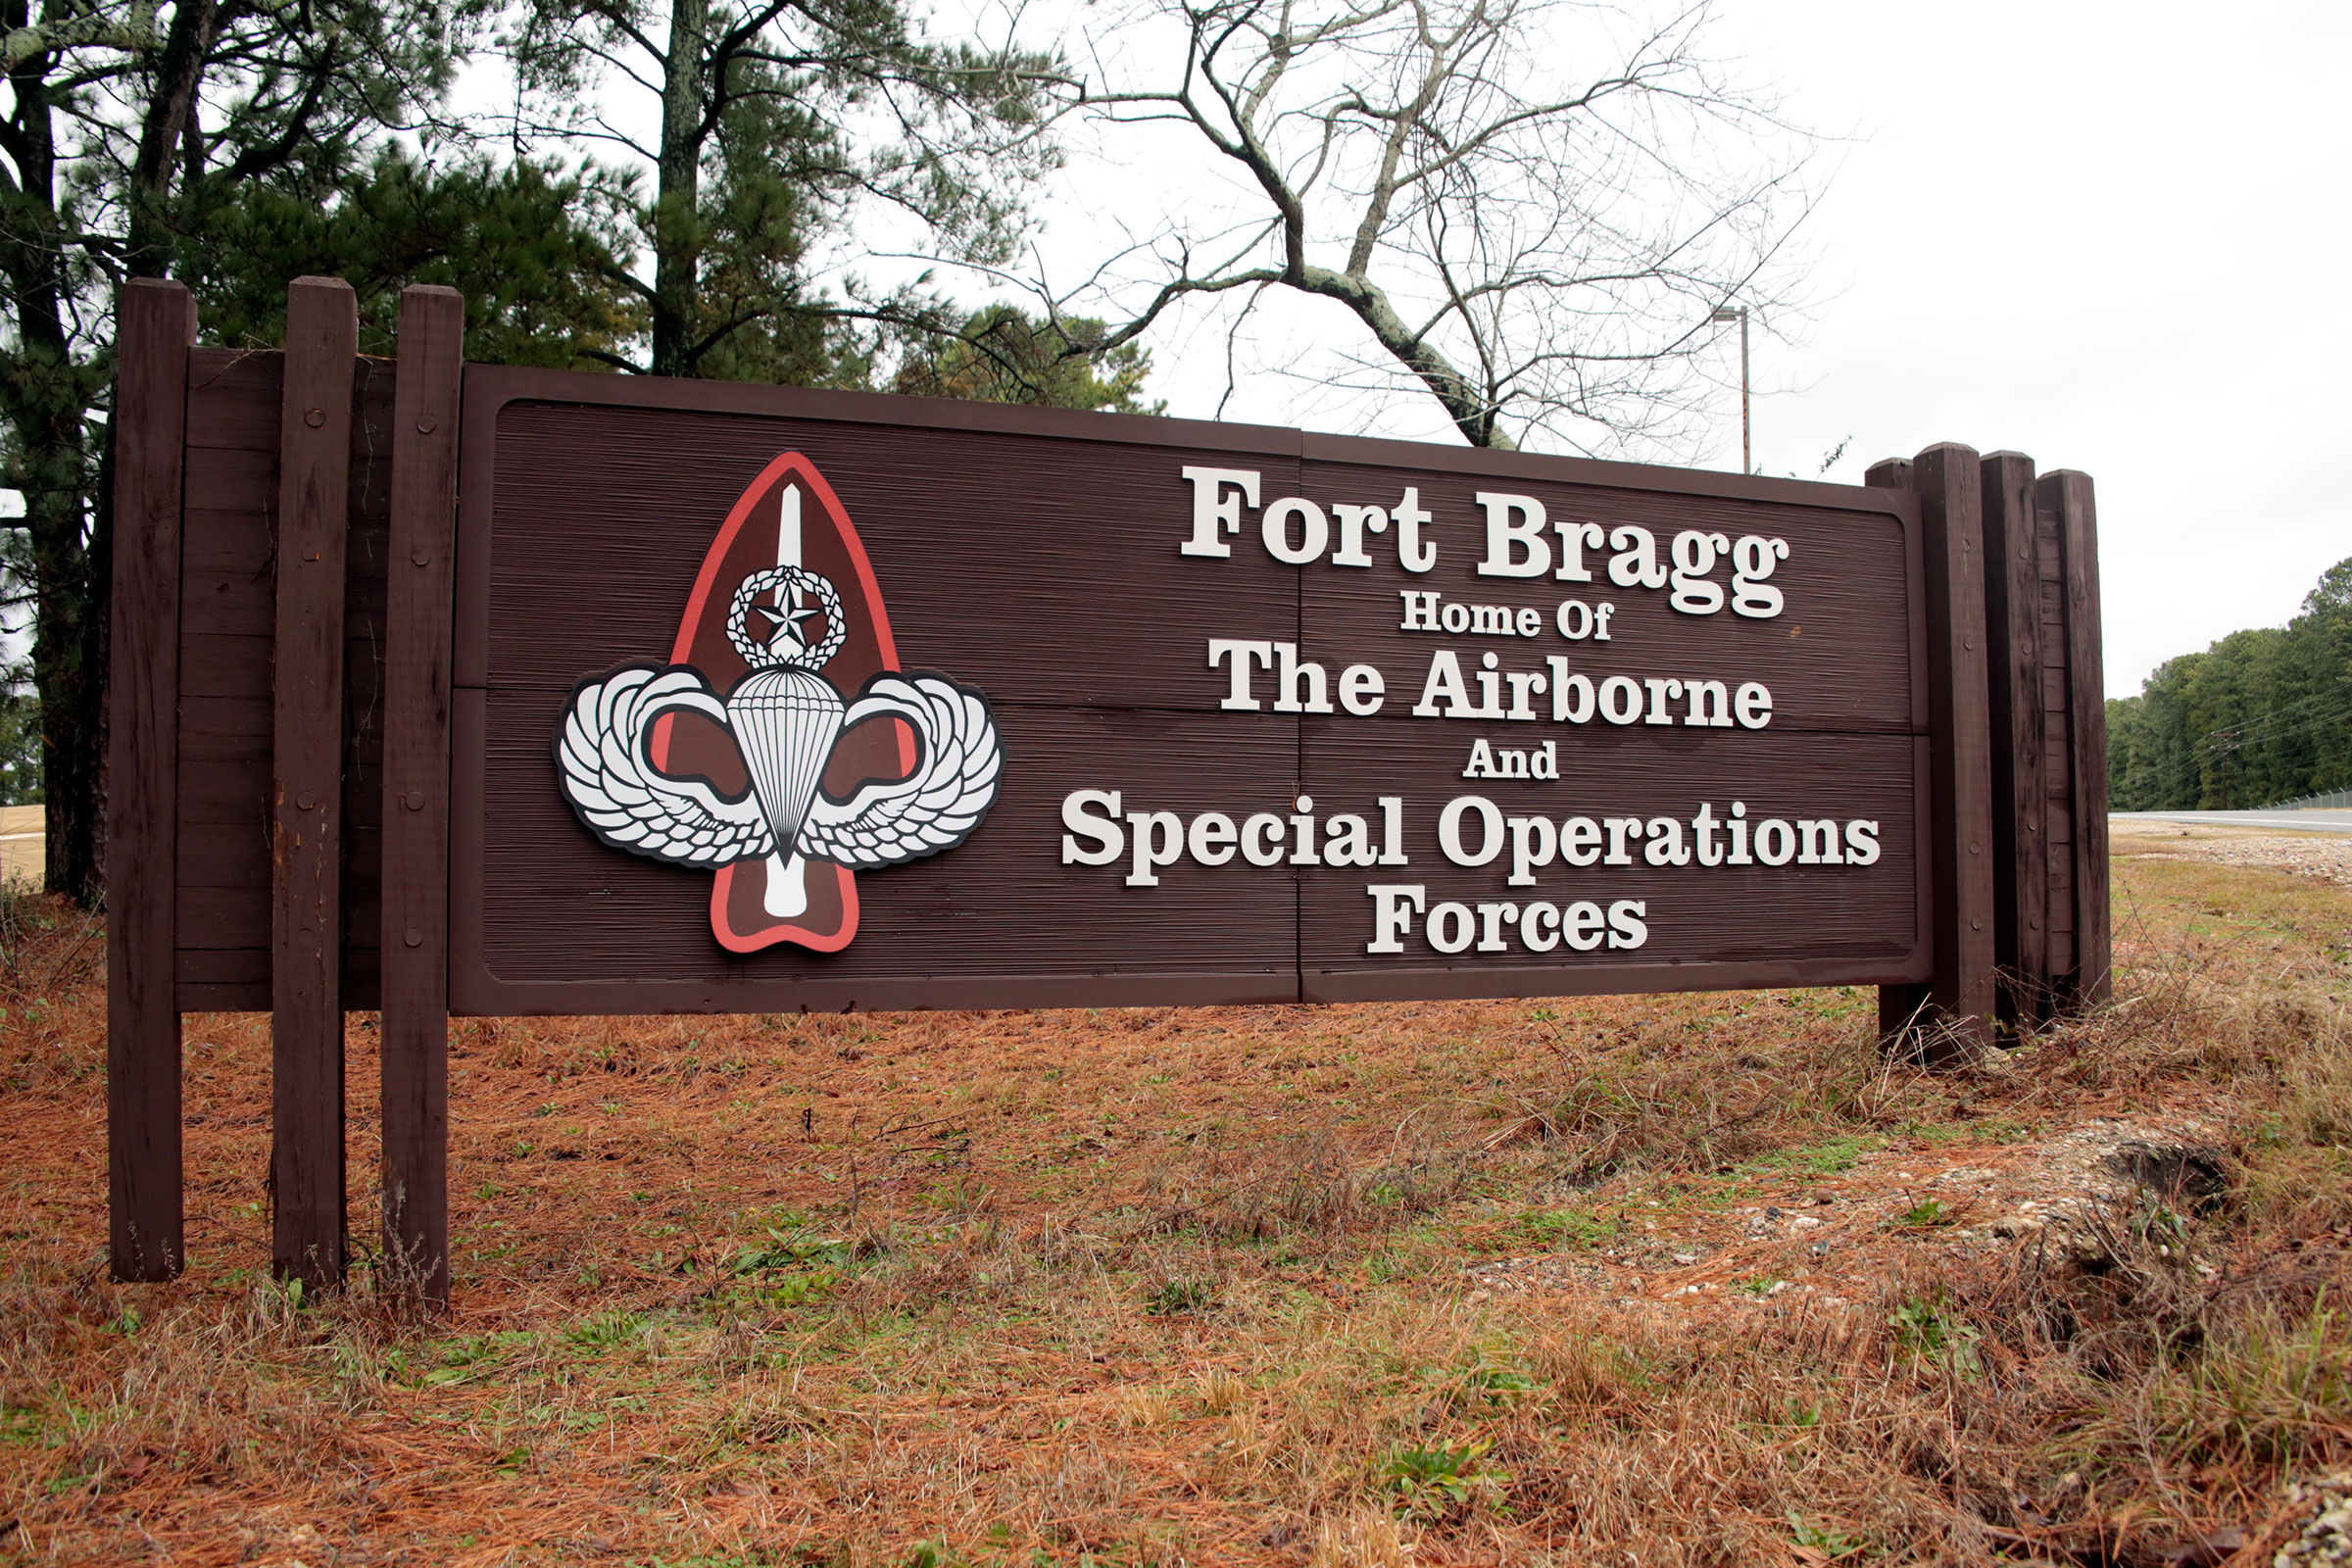 The sign for Fort Bragg in N.C., on Jan. 4, 2020. Defense Secretary Mark Esper and Army Secretary Ryan McCarthy, both former Army officers, put out word that they are “open to a bipartisan discussion” of renaming Army bases like North Carolina’s Fort Bragg that honor Confederate officers associated by some with the racism of that tumultuous time. (Chris Seward—AP)